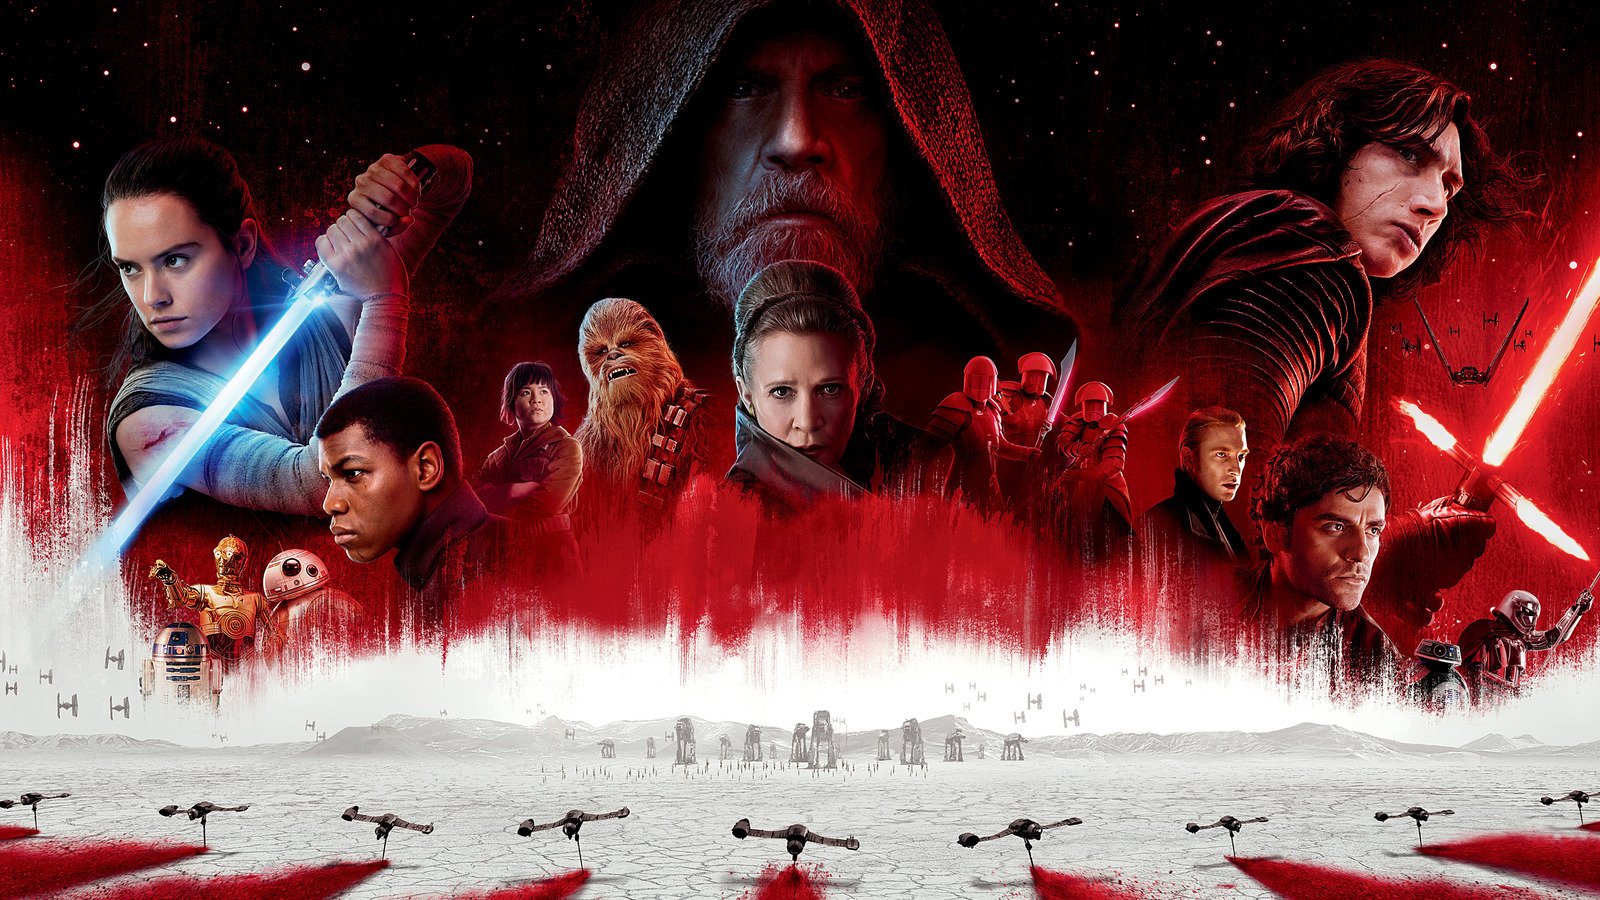 A movie poster showing the characters of 'The Last Jedi' 